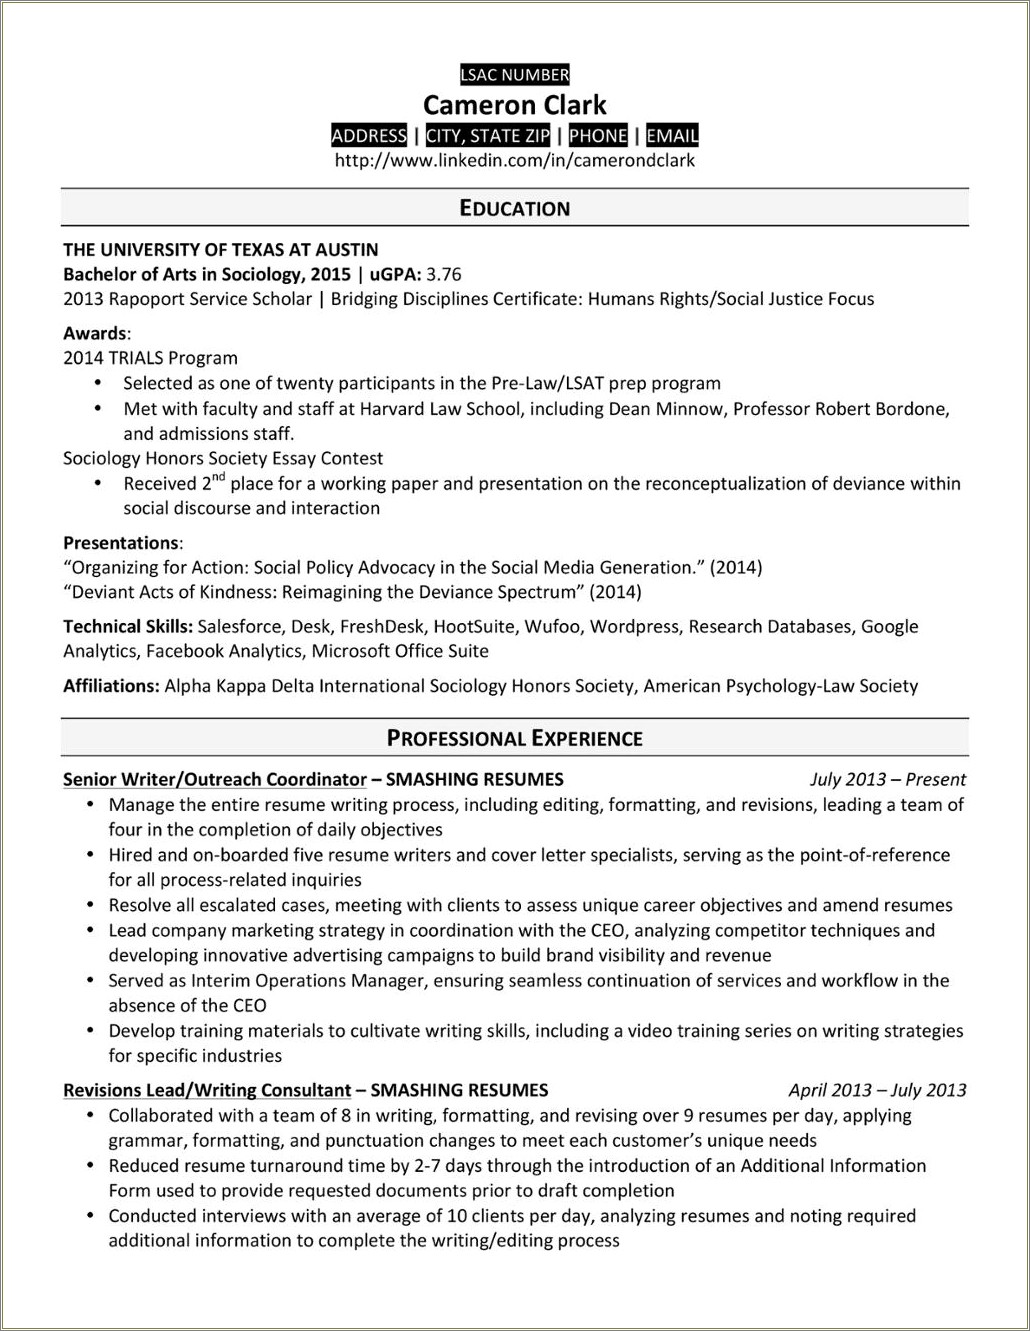 Where To Put Mission Statement On Resume